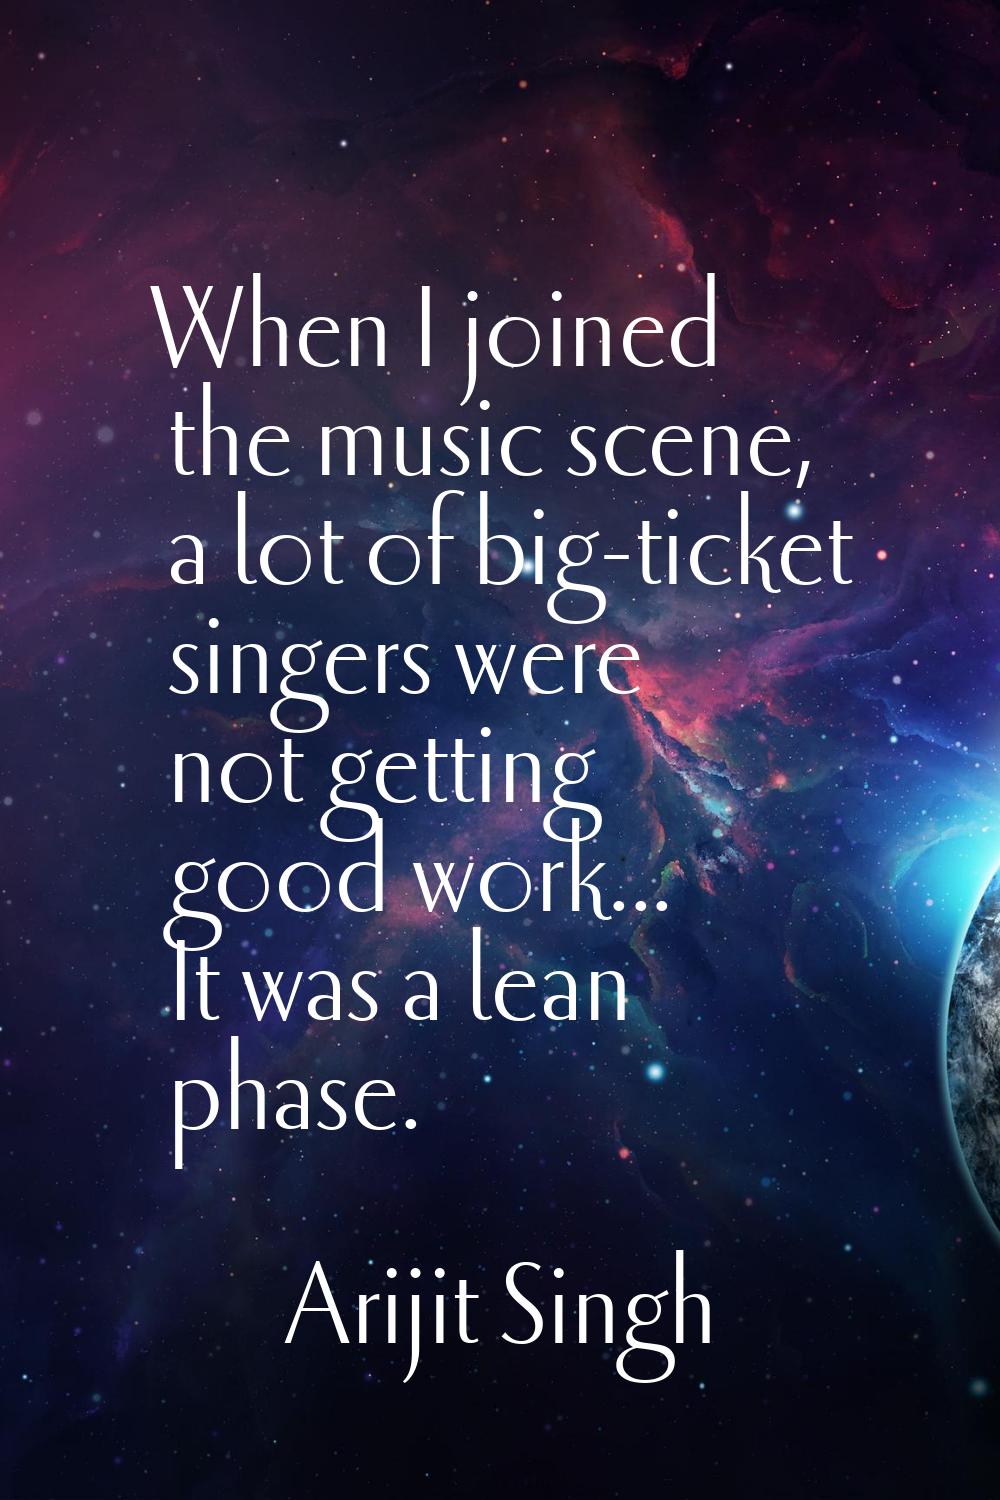 When I joined the music scene, a lot of big-ticket singers were not getting good work... It was a l